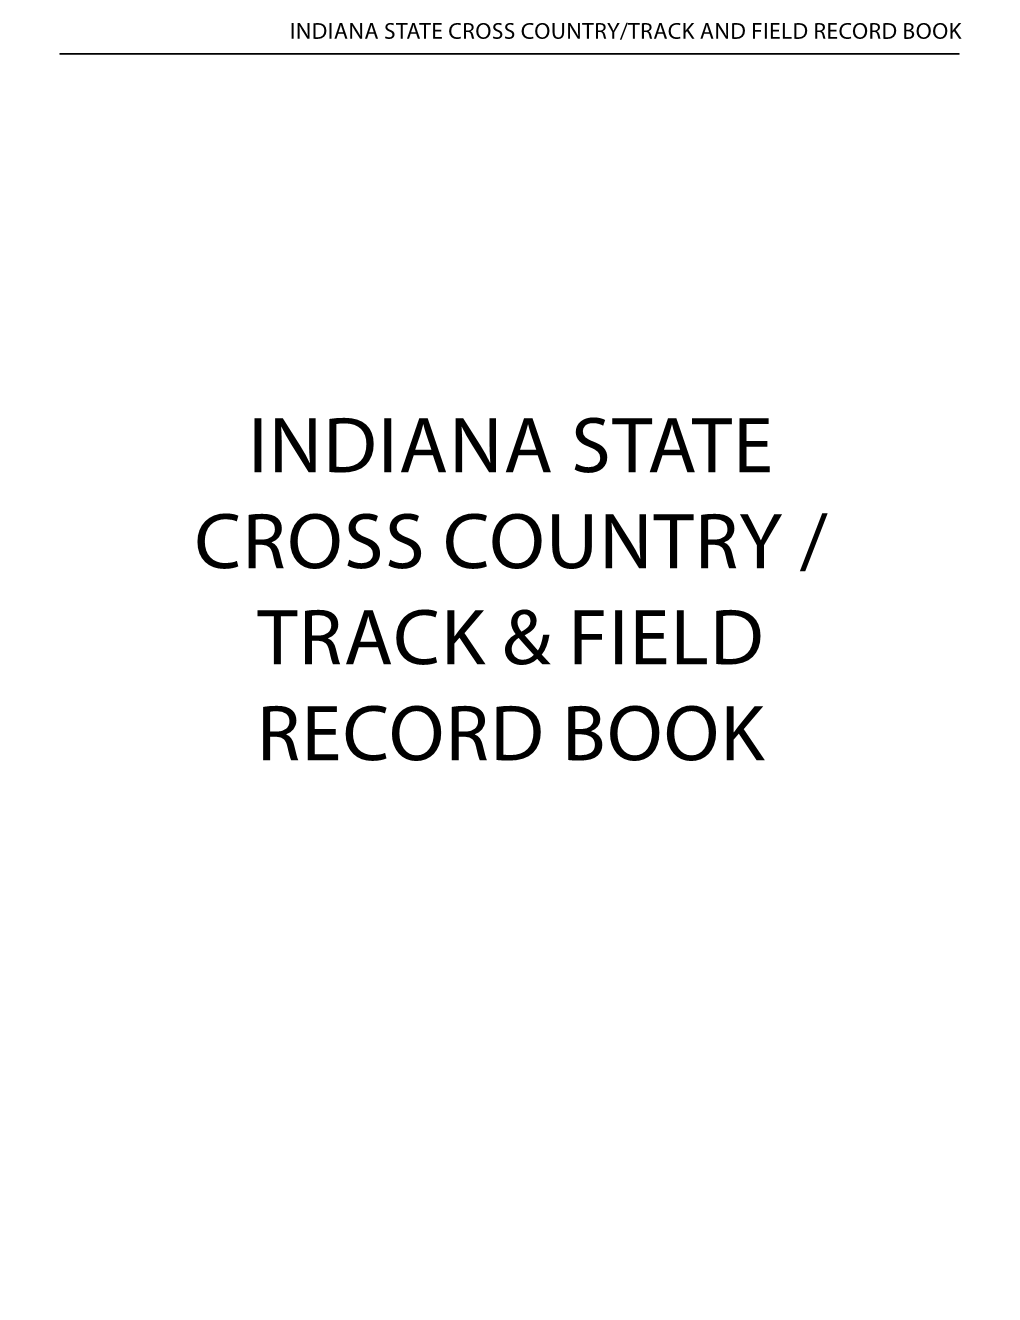 Indiana State Cross Country / Track & Field Record Book